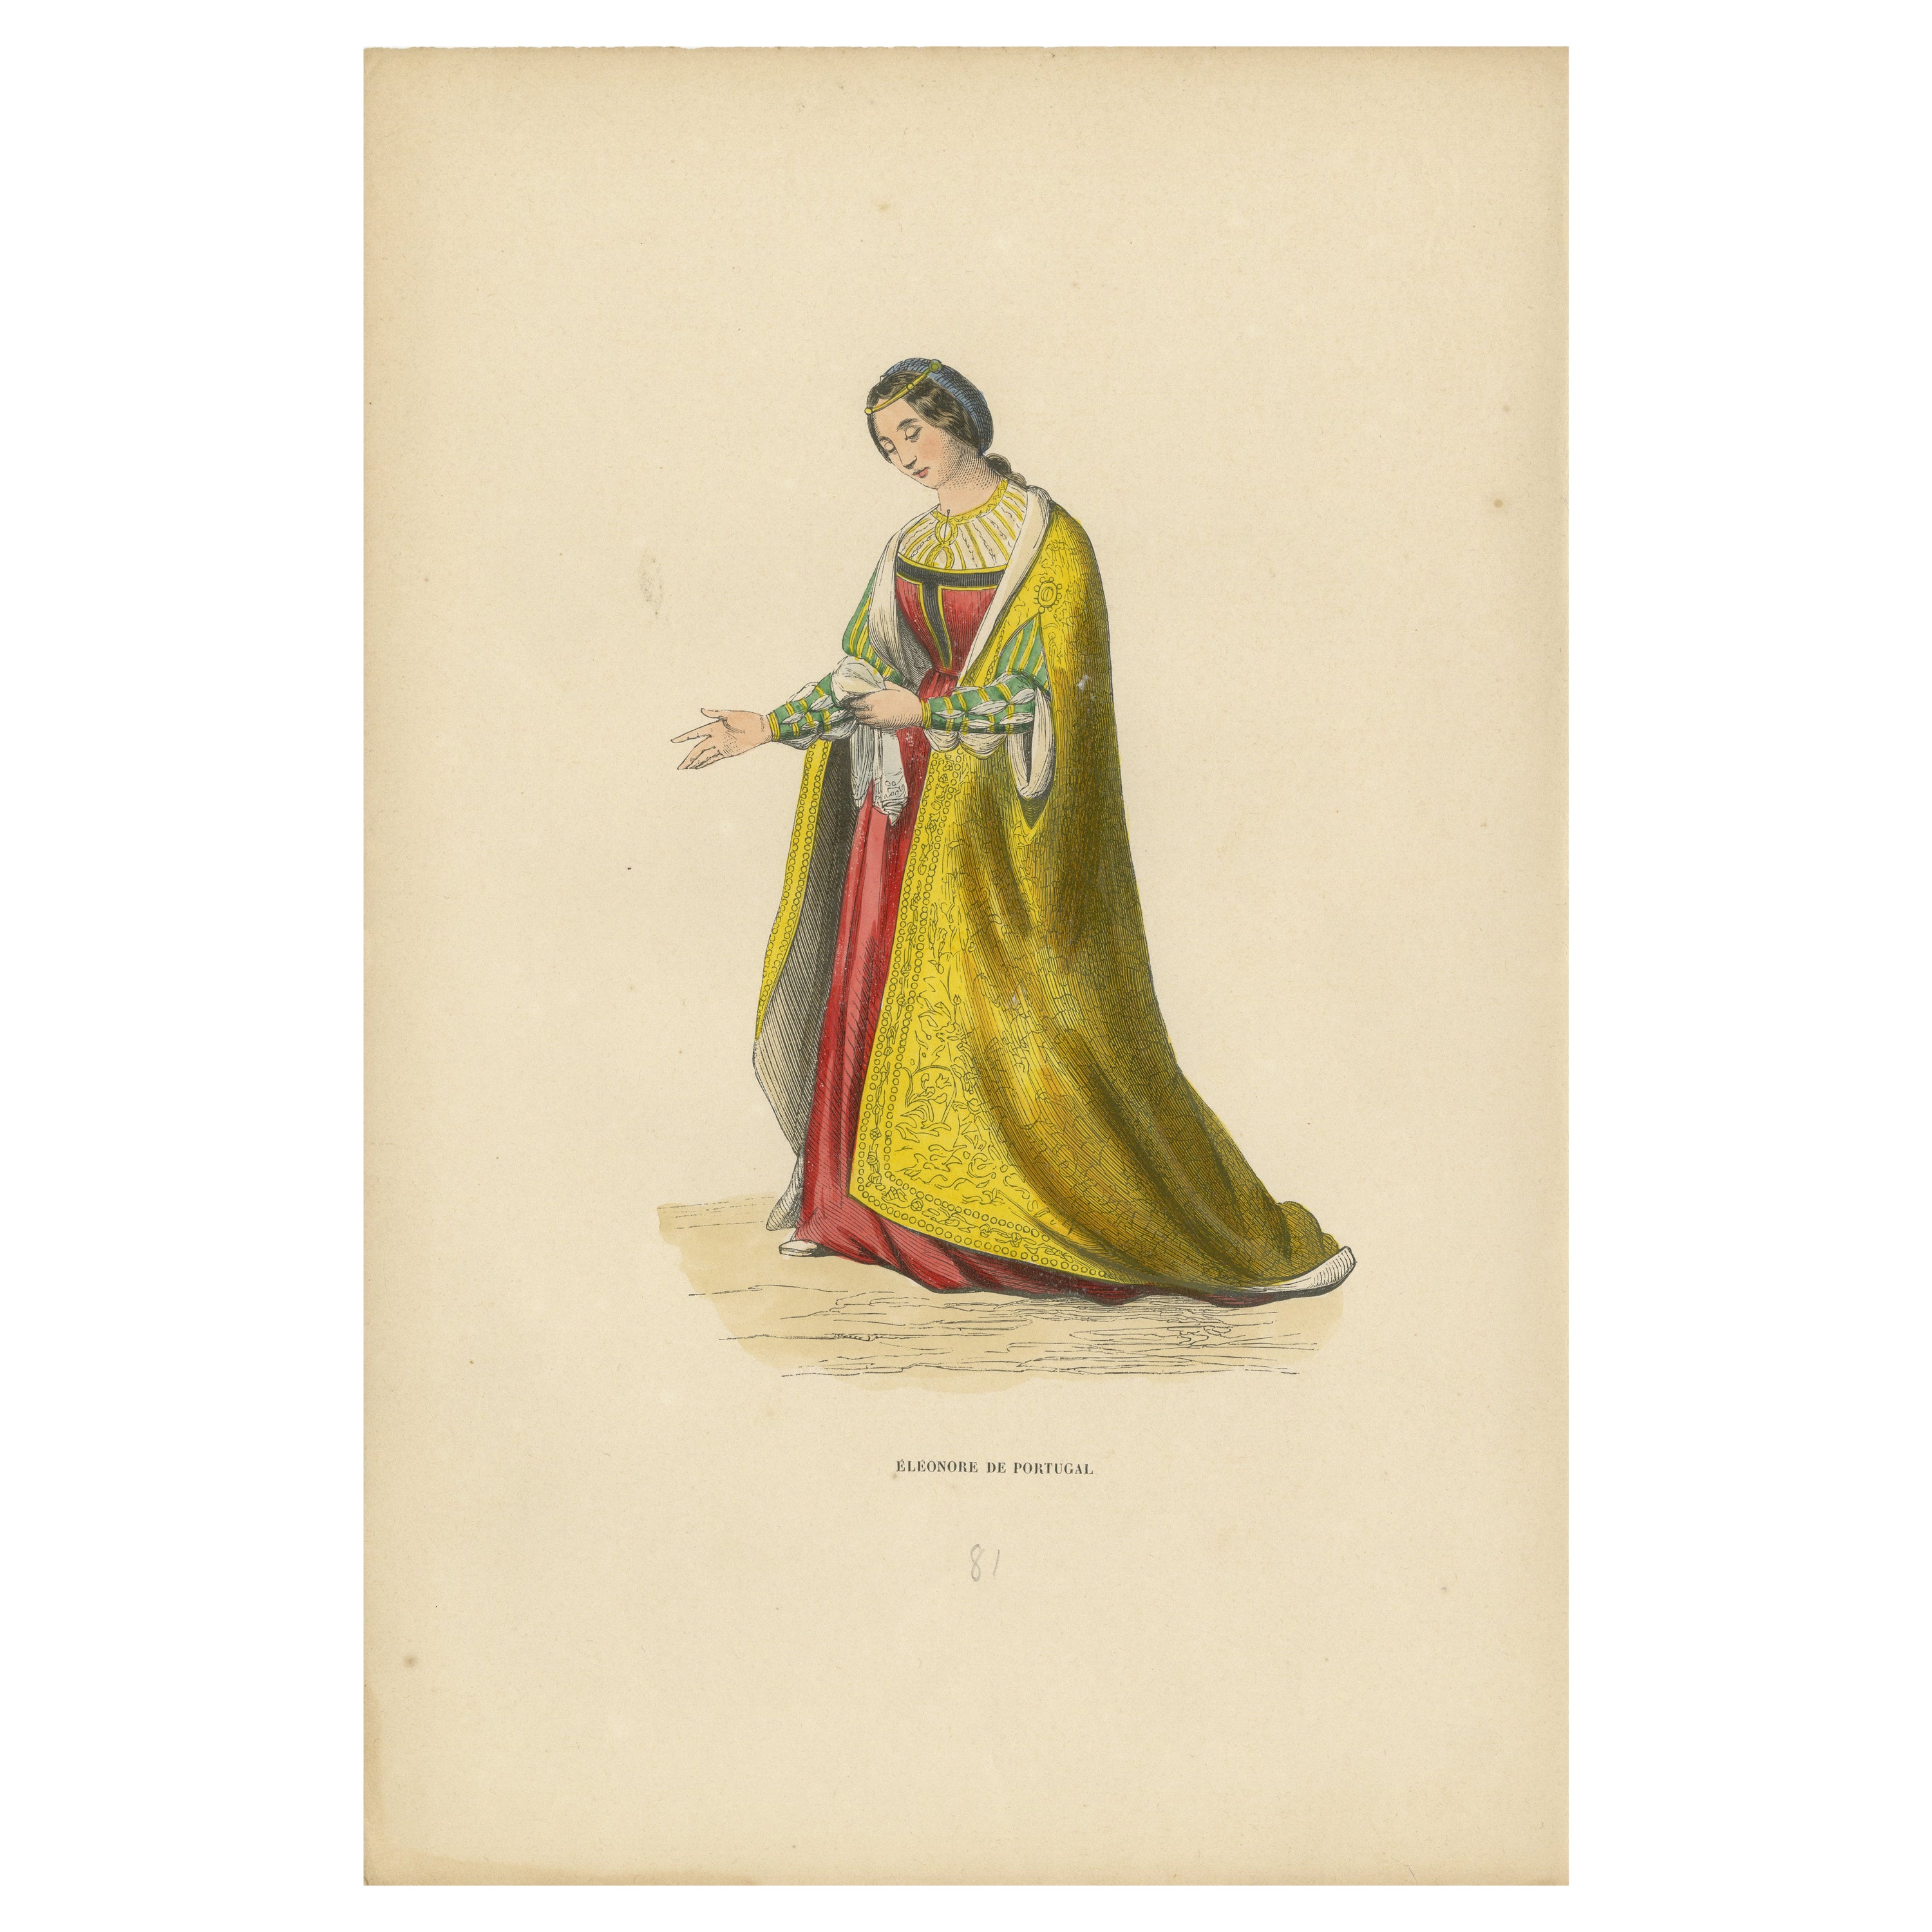 Eleanor of Portugal: Regal and Resplendent, Original Old Print Published in 1847